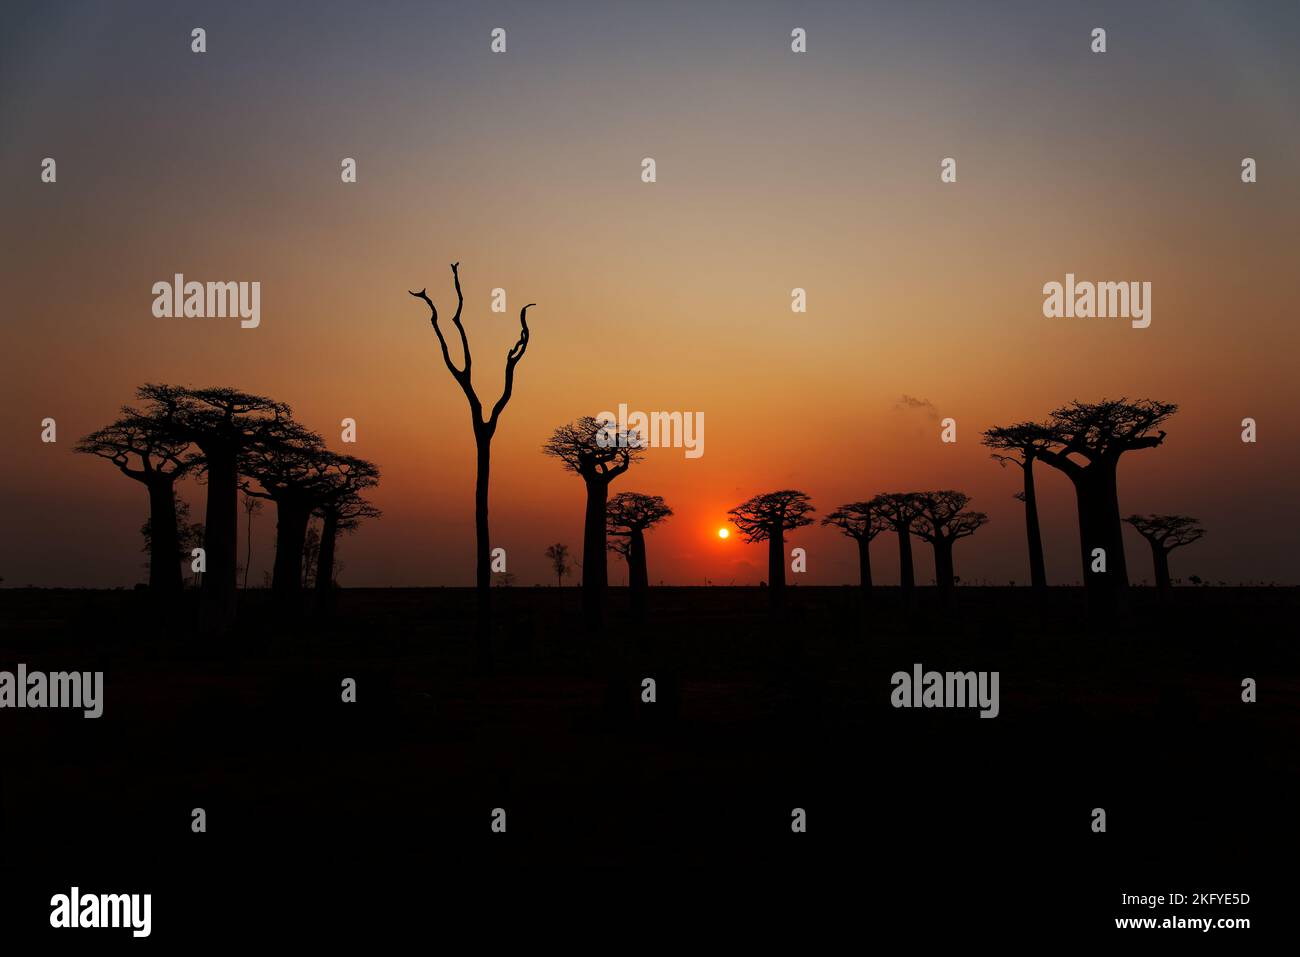 Landscape with the big trees baobabs in Madagascar. Baobab alley during sunset or sunrise, late evening orange sun and baobab silhouettes. Stock Photo